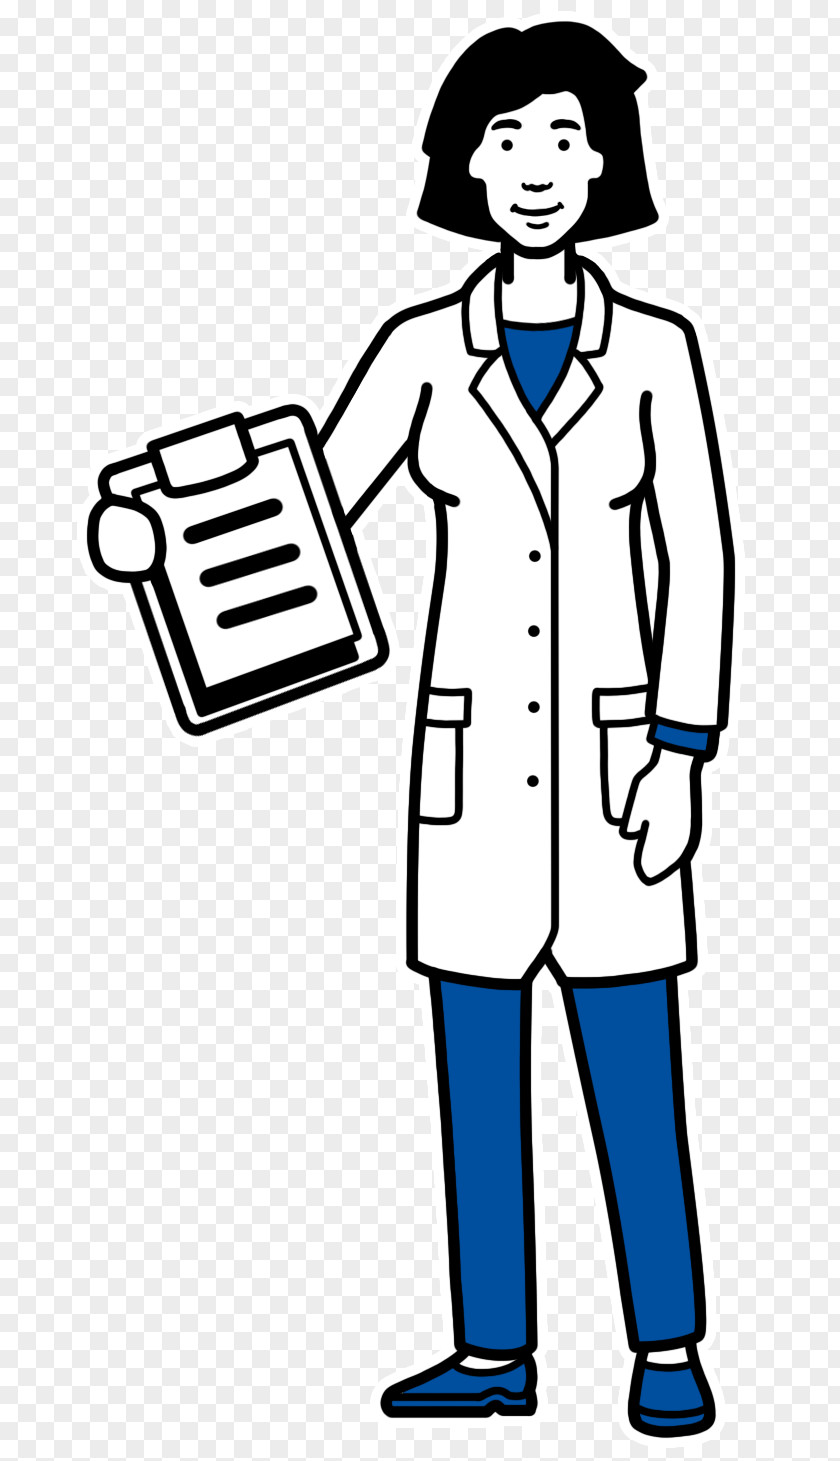 Hausa General Practitioner Physician Patient Itsourtree.com Clip Art PNG